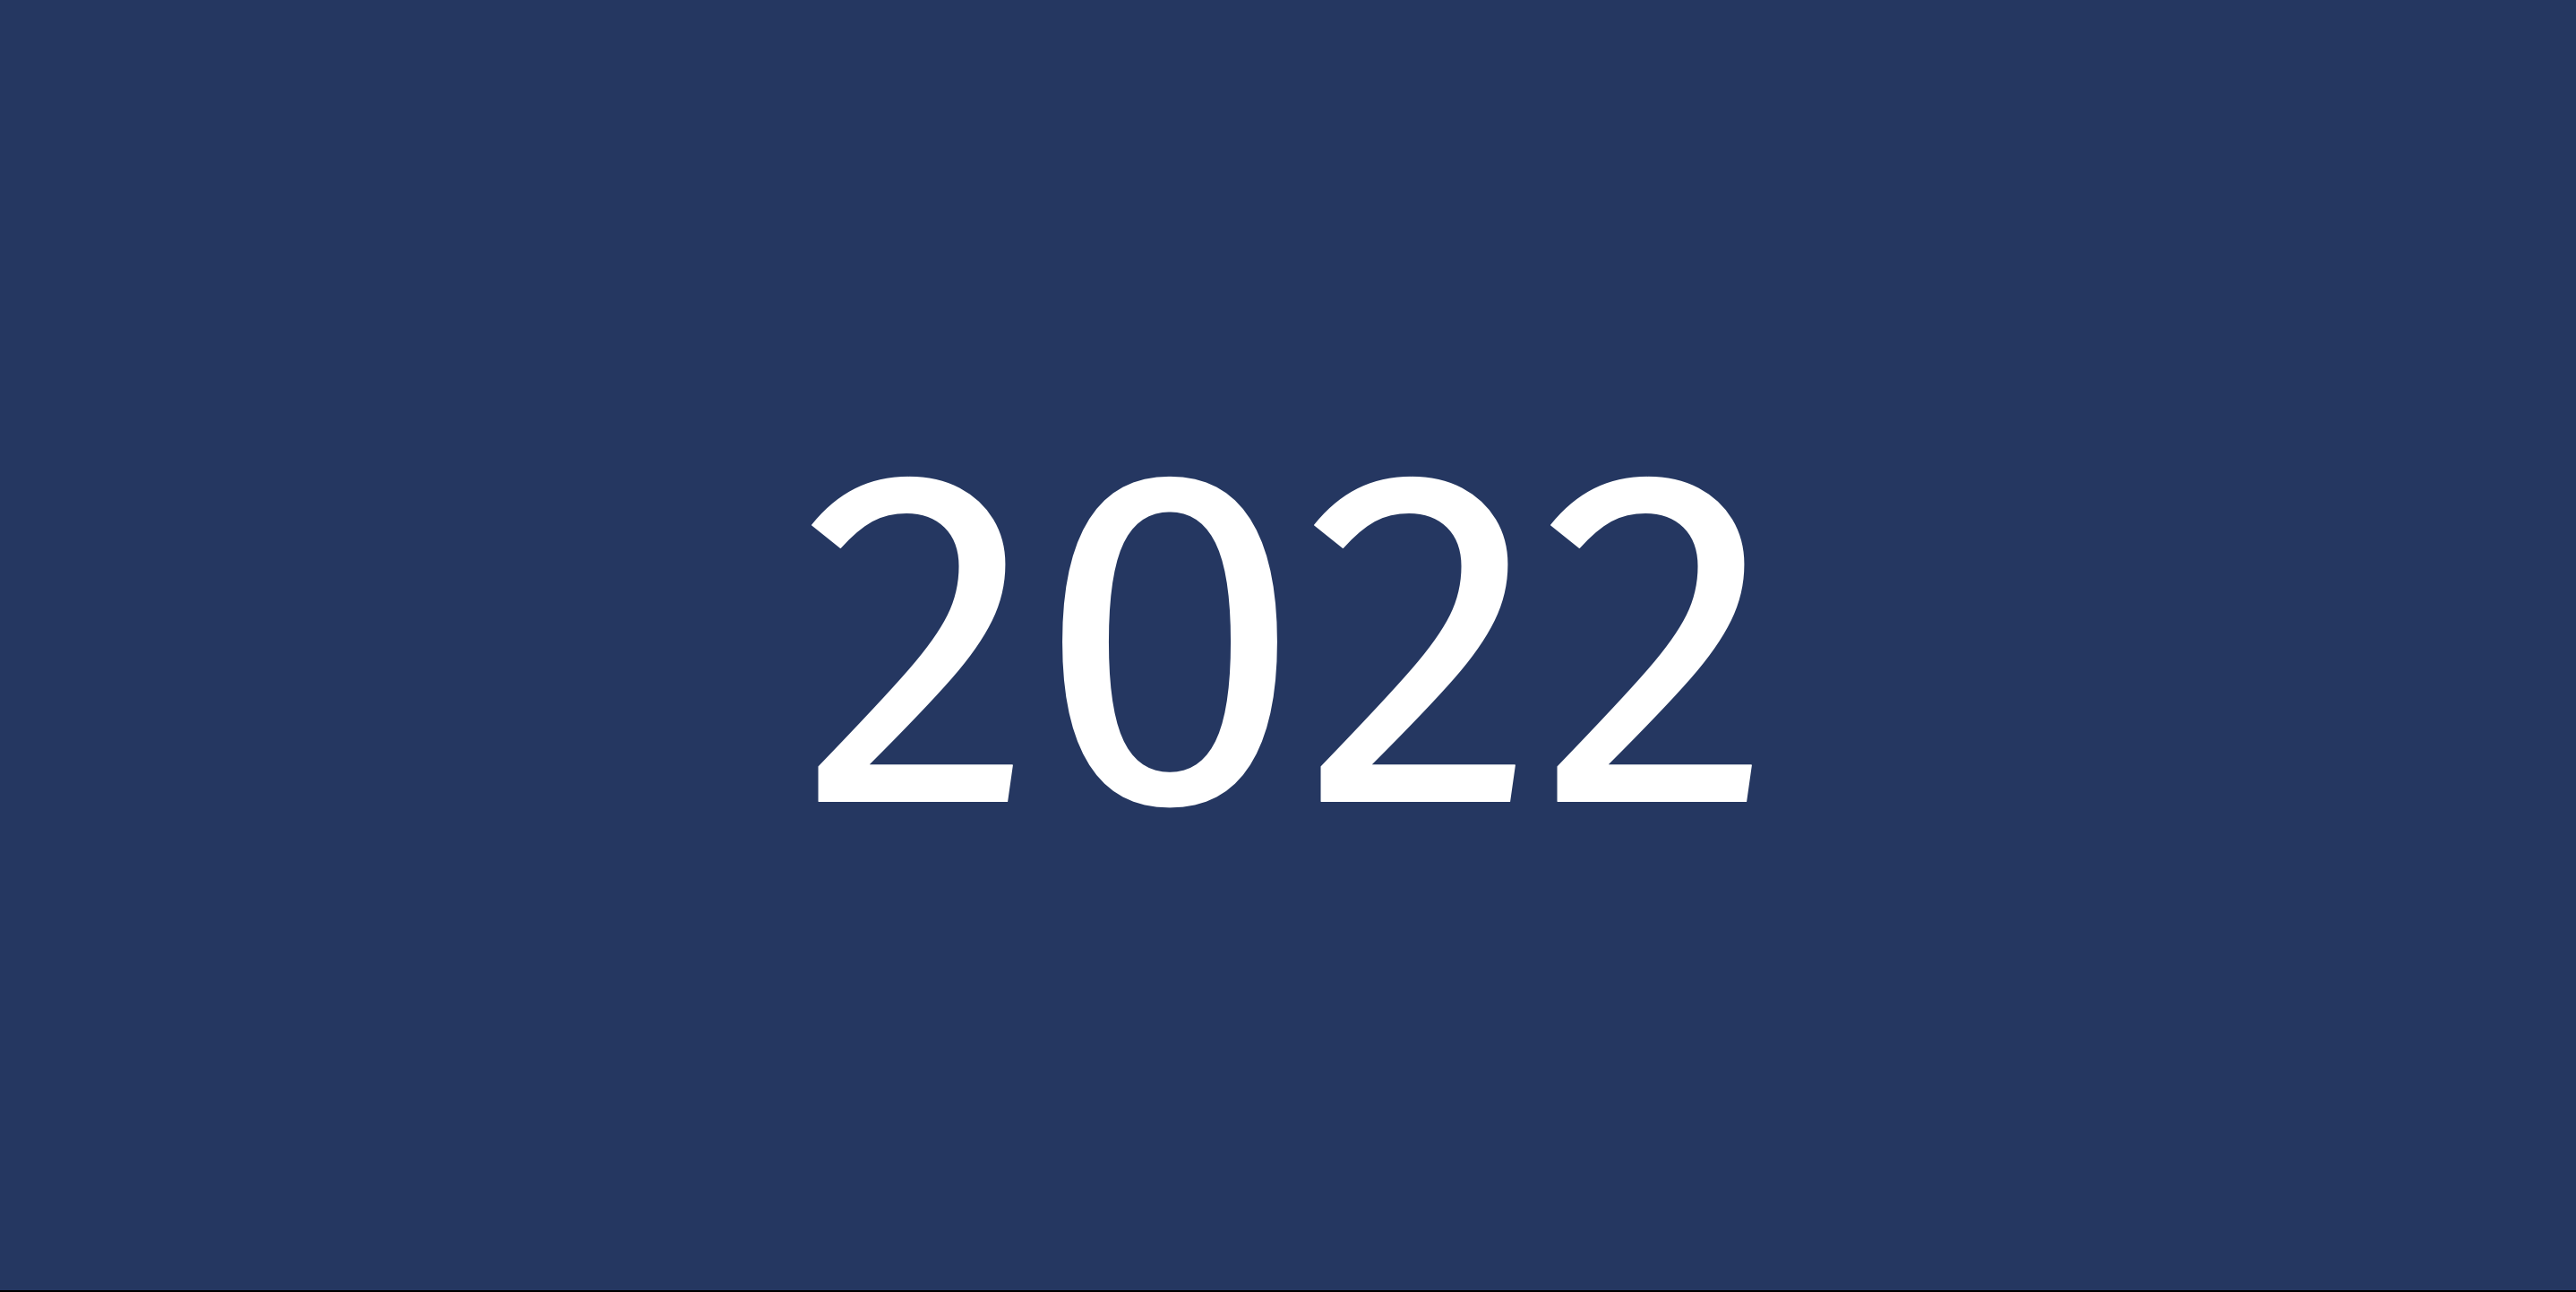 A blue button with the year 2022